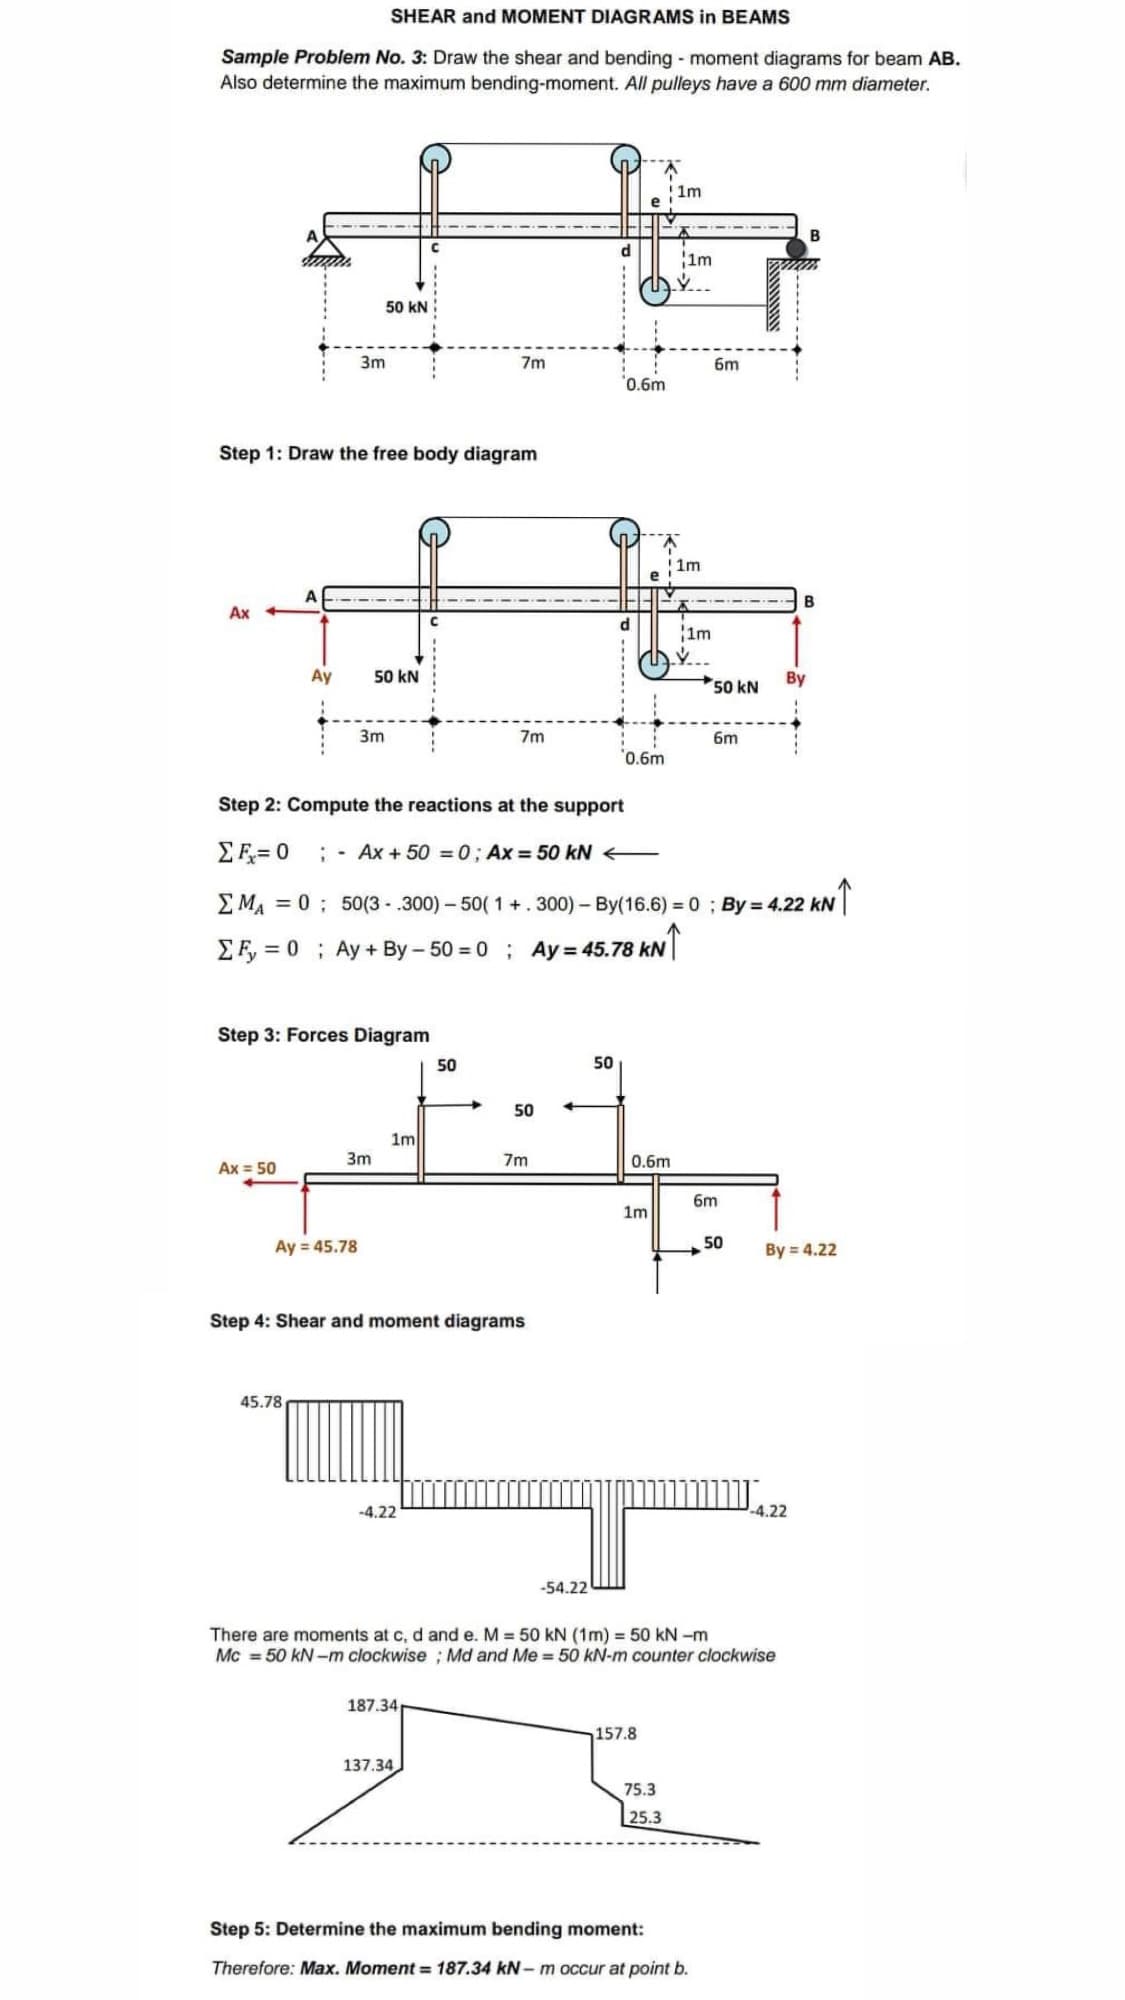 SHEAR and MOMENT DIAGRAMS in BEAMS
Sample Problem No. 3: Draw the shear and bending moment diagrams for beam AB.
Also determine the maximum bending-moment. All pulleys have a 600 mm diameter.
Ax
Step 1: Draw the free body diagram
A
Ax = 50
Ay
50 kN
3m
45.78
Ay = 45.78
50 kN
Step 3: Forces Diagram
3m
3m
1ml
-4.22
C
7m
187.34
50
137.34
7m
Step 4: Shear and moment diagrams
50
Step 2: Compute the reactions at the support
ΣΕ= 0 ; - Ax + 50 = 0; Ax= 50 kN
ΣM₁ = 0; 50(3-.300)-50(1+. 300) - By(16.6) = 0 ; By = 4.22 kN
78 KN↑
ΣF, = 0; Ay+By-50=0; Ay= 45.78 KN
7m
-54.22
0.6m
50
0.6m
0.6m
1m
!1m
157.8
1m
Ý...
75.3
25.3
1m
1m
6m
50 kN
Step 5: Determine the maximum bending moment:
Therefore: Max. Moment=187.34 kN-m occur at point b.
6m
There are moments at c, d and e. M = 50 kN (1m) = 50 kN -m
Mc = 50 kN-m clockwise ; Md and Me = 50 kN-m counter clockwise
6m
50
By
B
B
-4.22
By = 4.22